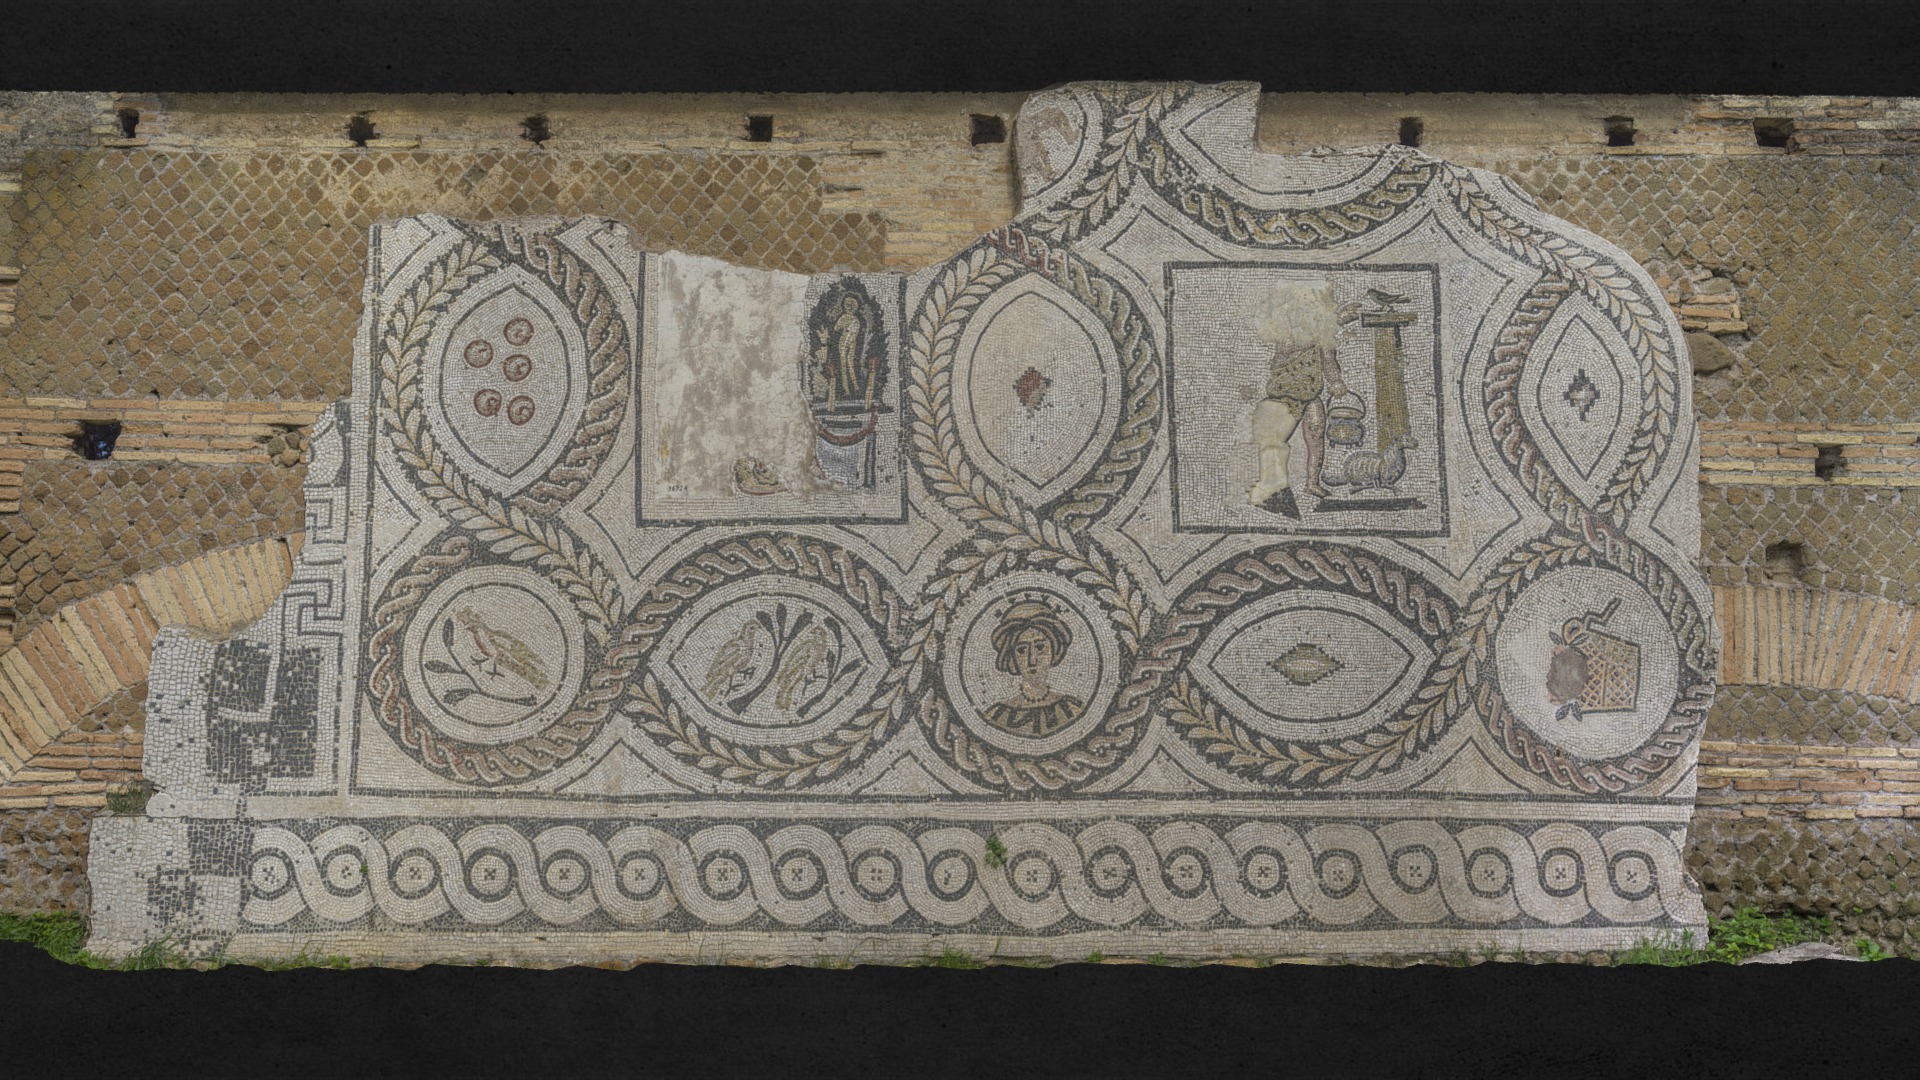 3D model 2018 – Mosaico Parietale – Ostia - This is a 3D model of the 2018 - Mosaico Parietale - Ostia. The 3D model is about a stone wall with carvings.